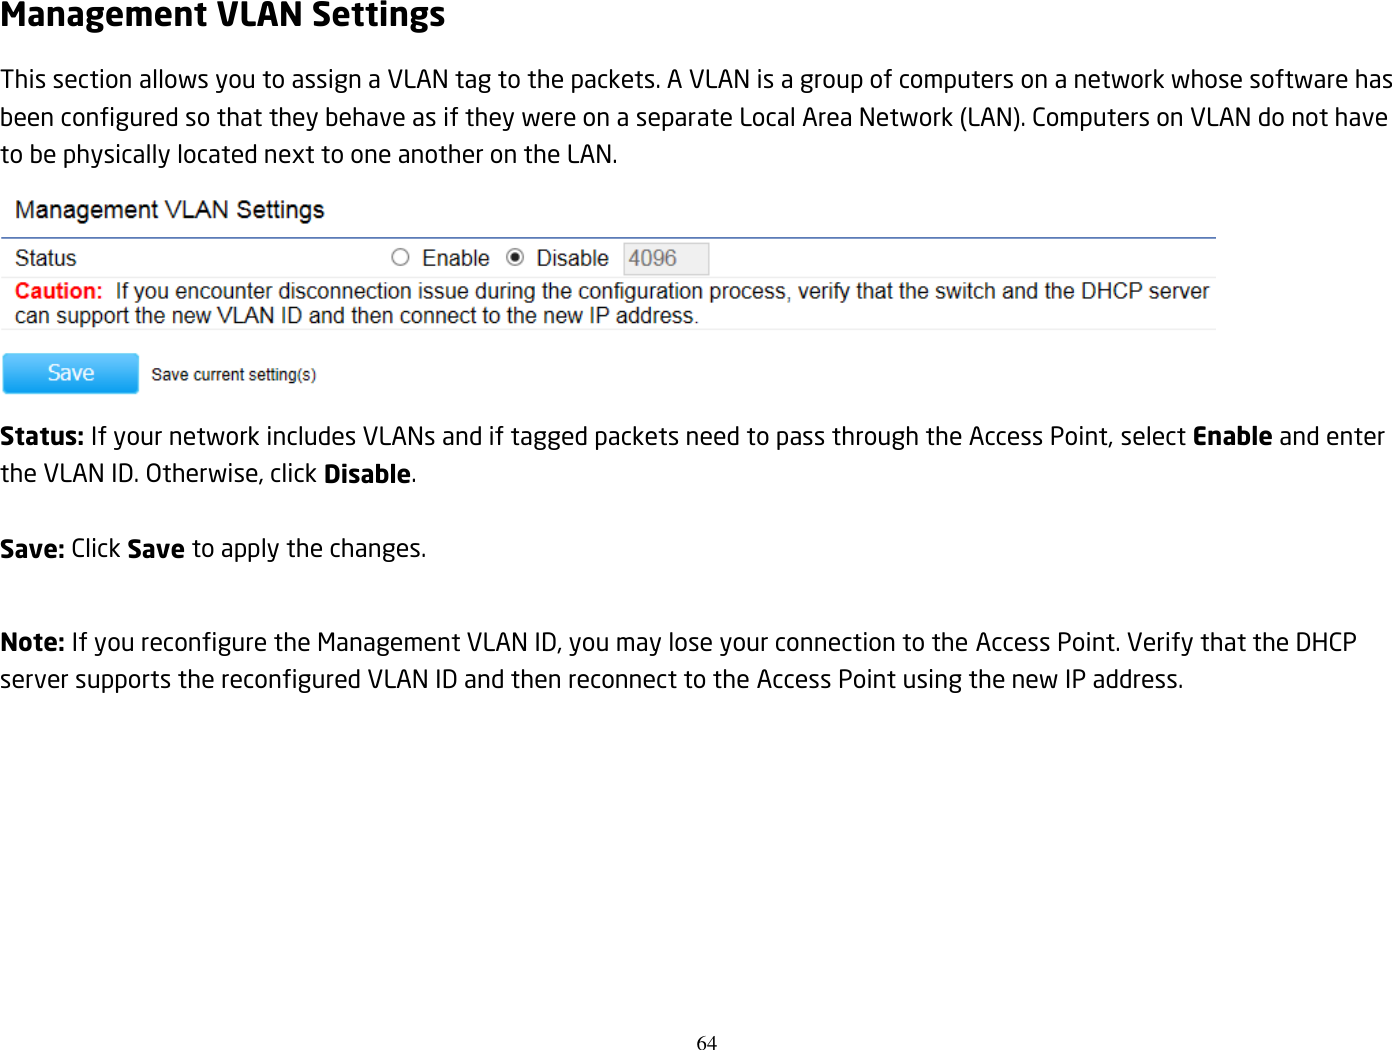 64  Management VLAN Settings This section allows you to assign a VLAN tag to the packets. A VLAN is a group of computers on a network whose software has been configured so that they behave as if they were on a separate Local Area Network (LAN). Computers on VLAN do not have to be physically located next to one another on the LAN.  Status: If your network includes VLANs and if tagged packets need to pass through the Access Point, select Enable and enter the VLAN ID. Otherwise, click Disable.  Save: Click Save to apply the changes.  Note: If you reconfigure the Management VLAN ID, you may lose your connection to the Access Point. Verify that the DHCP server supports the reconfigured VLAN ID and then reconnect to the Access Point using the new IP address.  